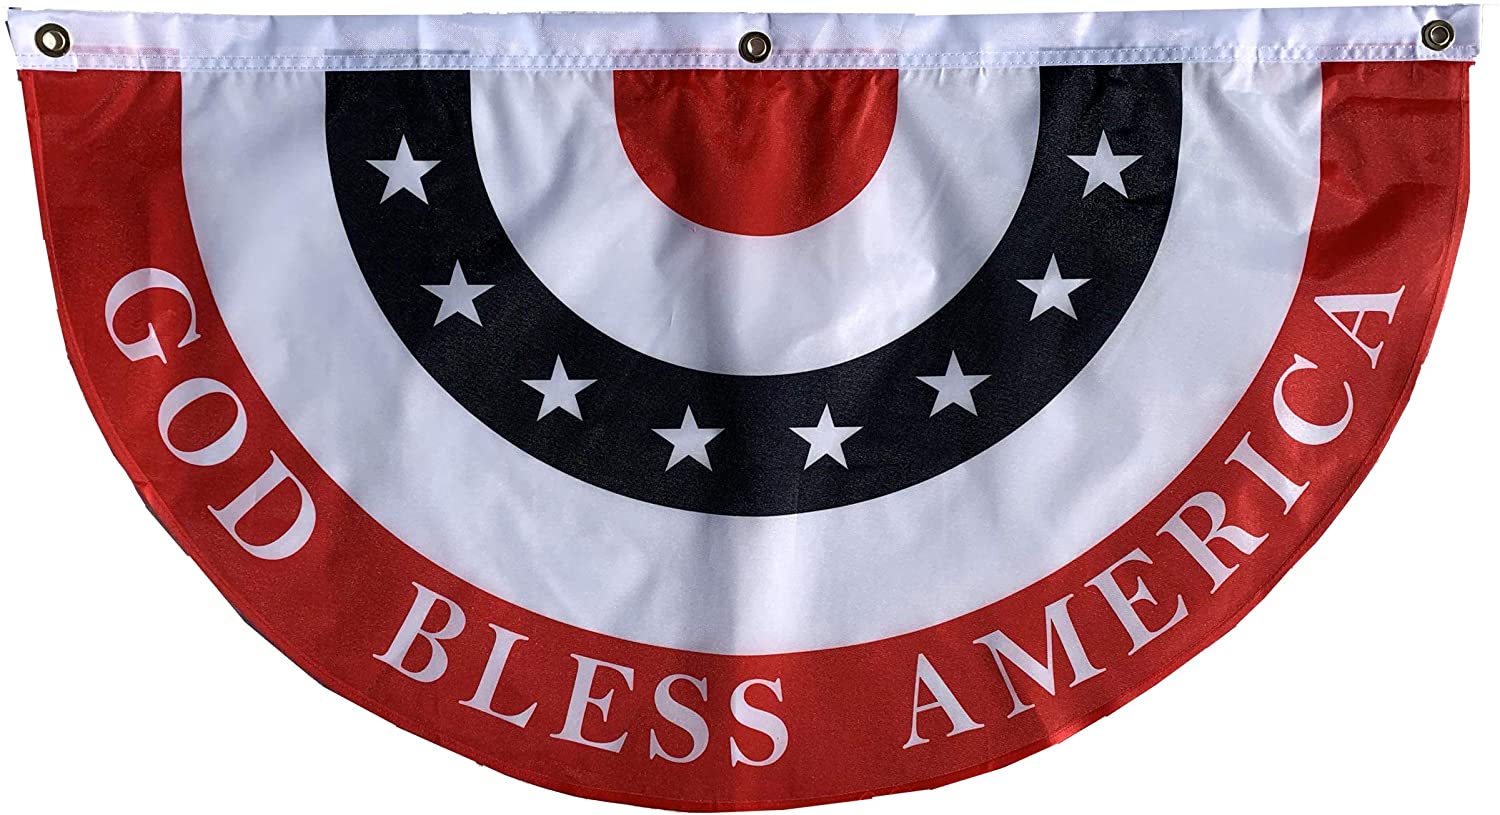 God Bless America Bunting Flag – 18” x 36”, USA, President's Day, Memorial Day, 4th of July, Patriotic Decoration, Christmas - image 1 of 6